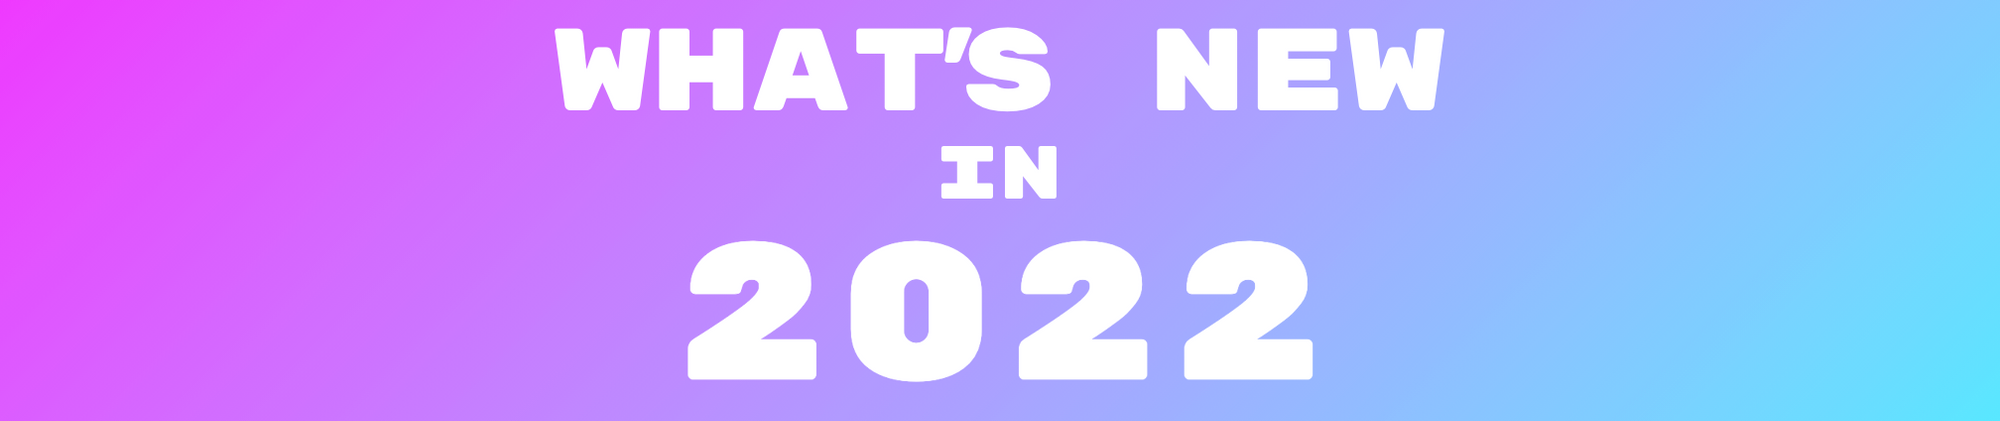 2022 Brings New Features and New Support Tools